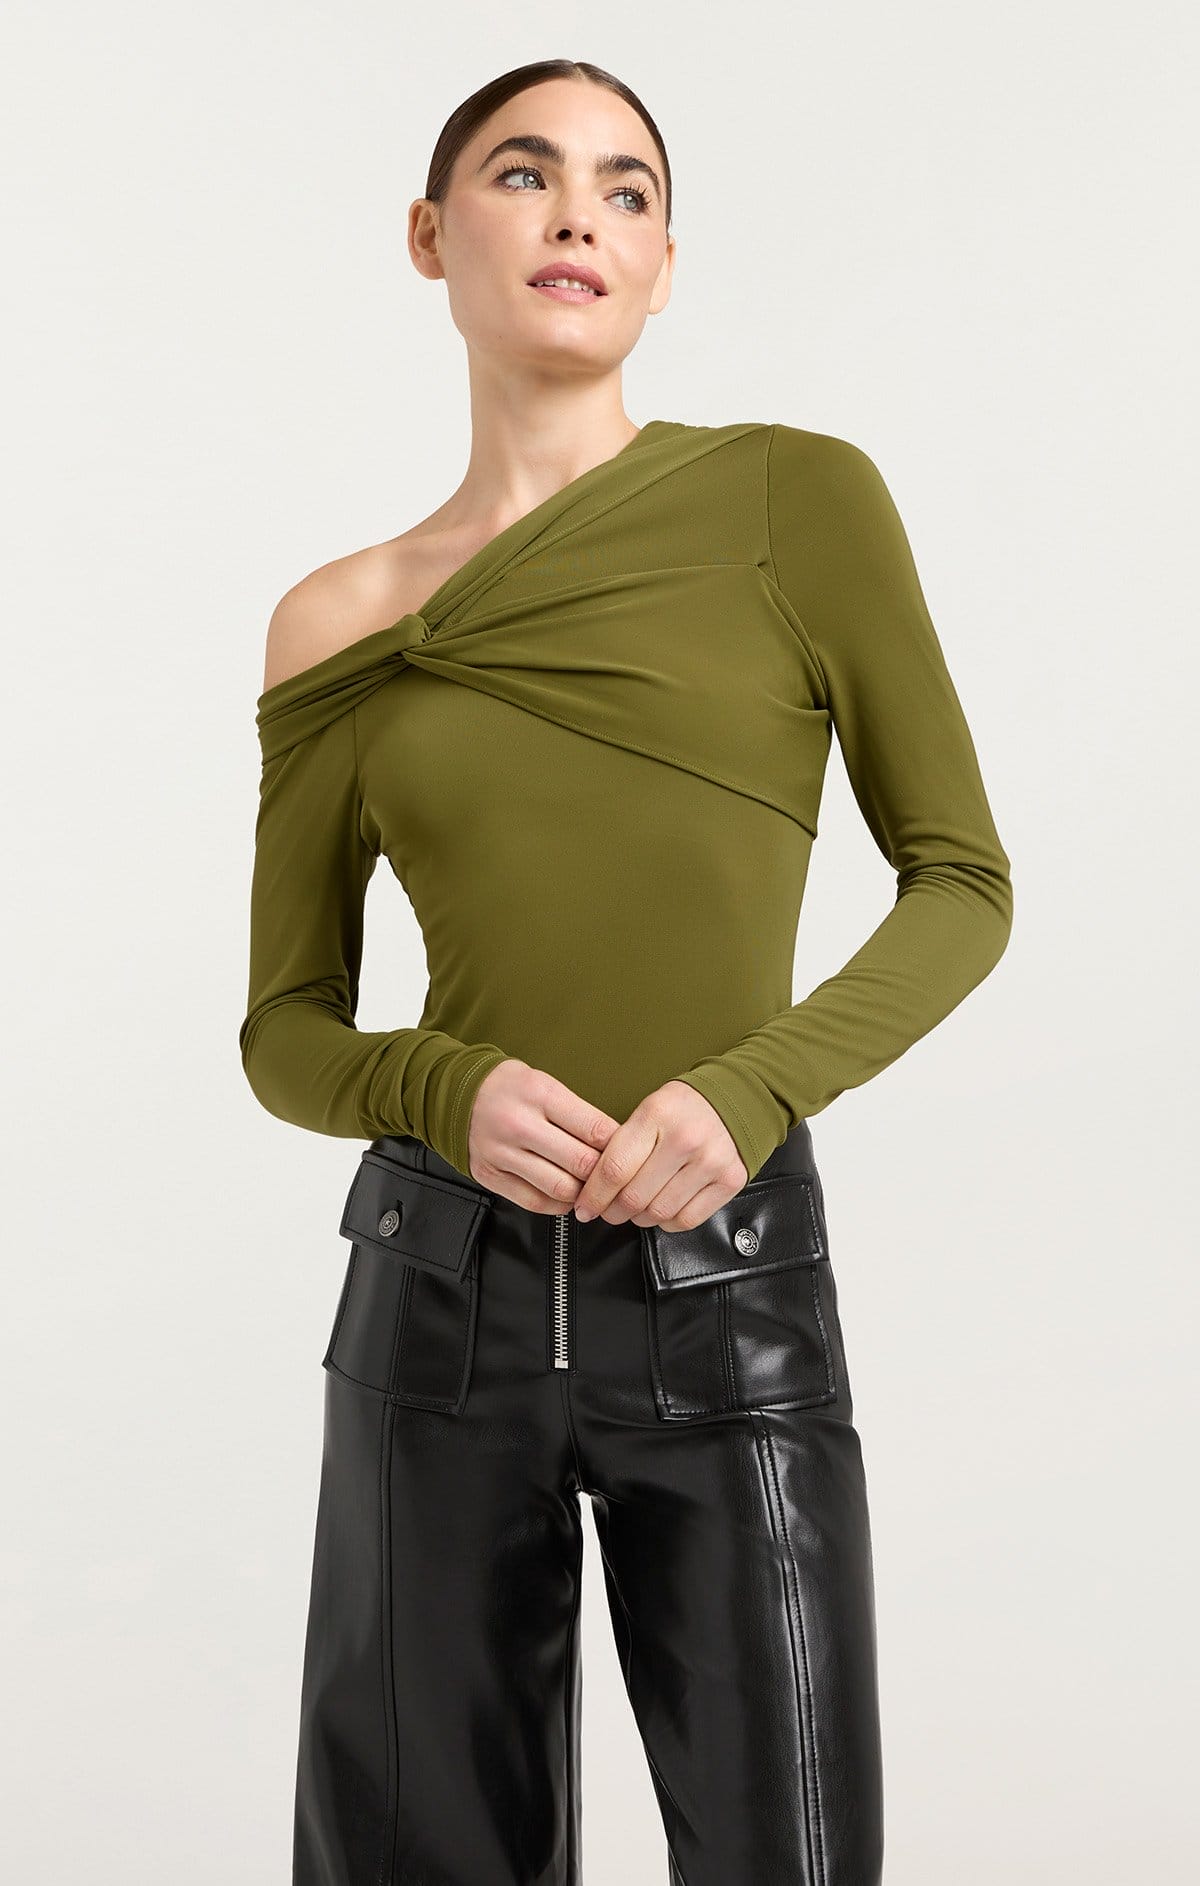 https://cinqasept.nyc/collections/sale/products/zaya-top-in-olive-green